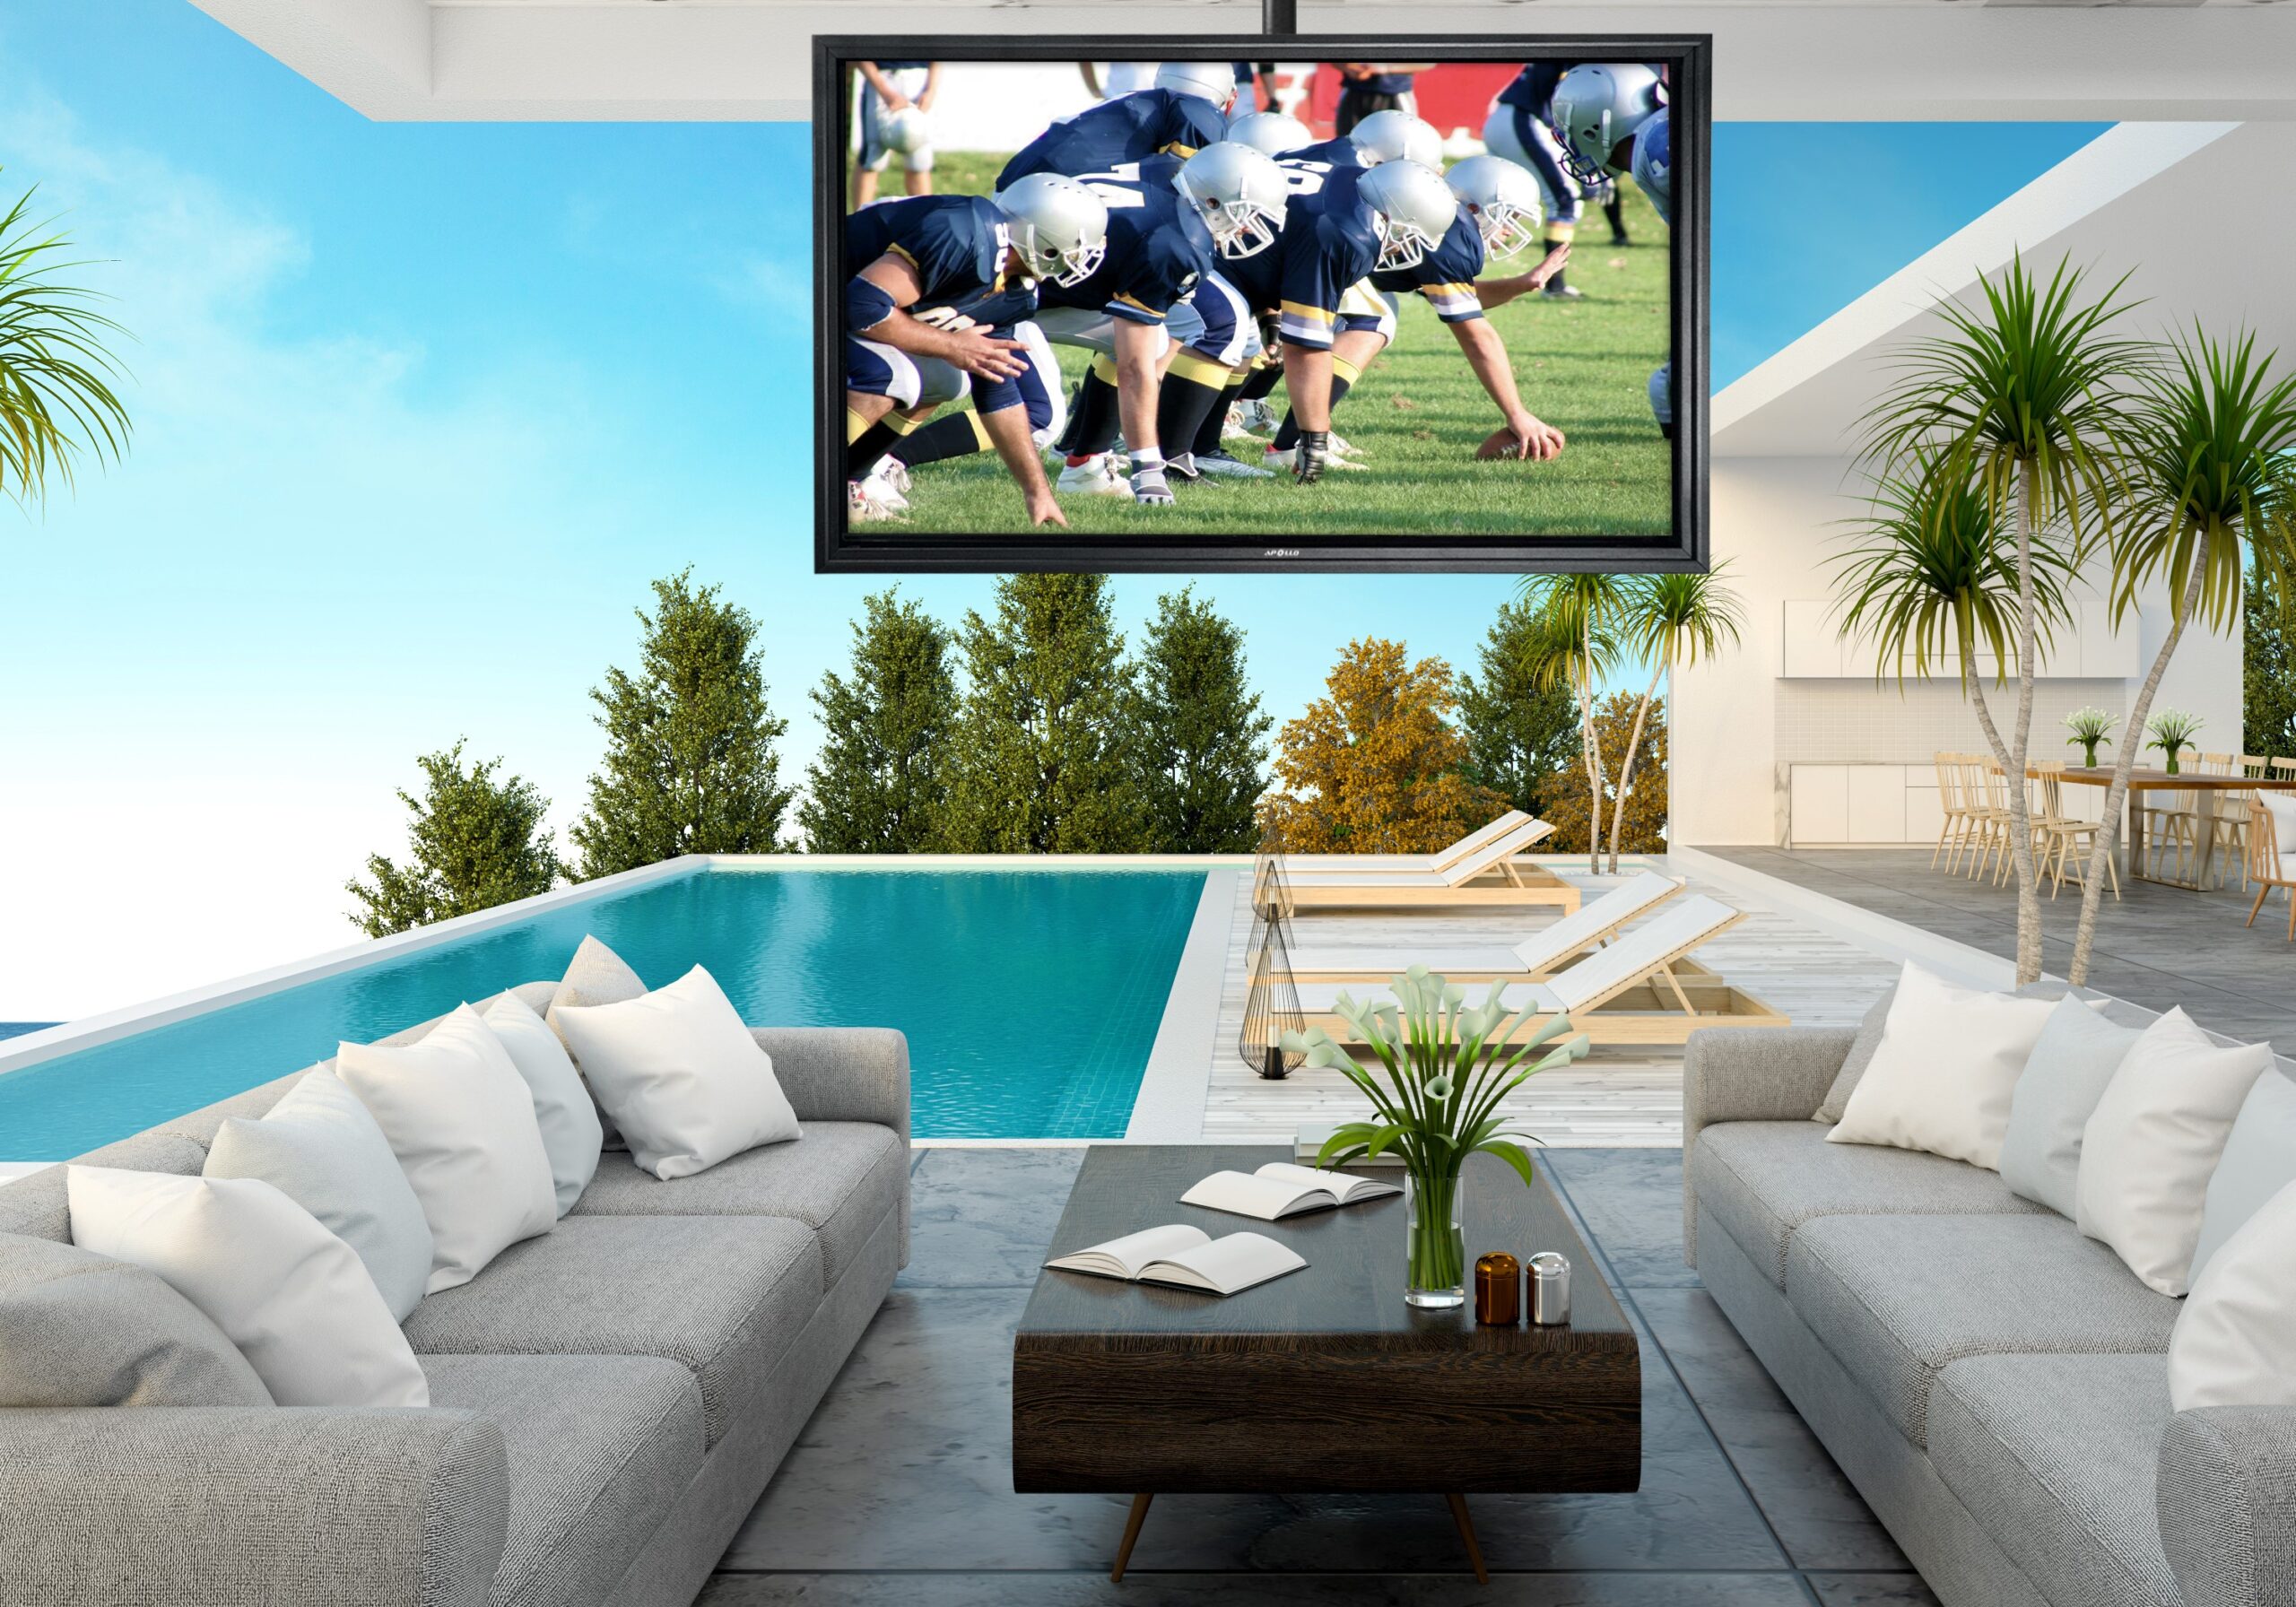 What Makes an Outdoor TV